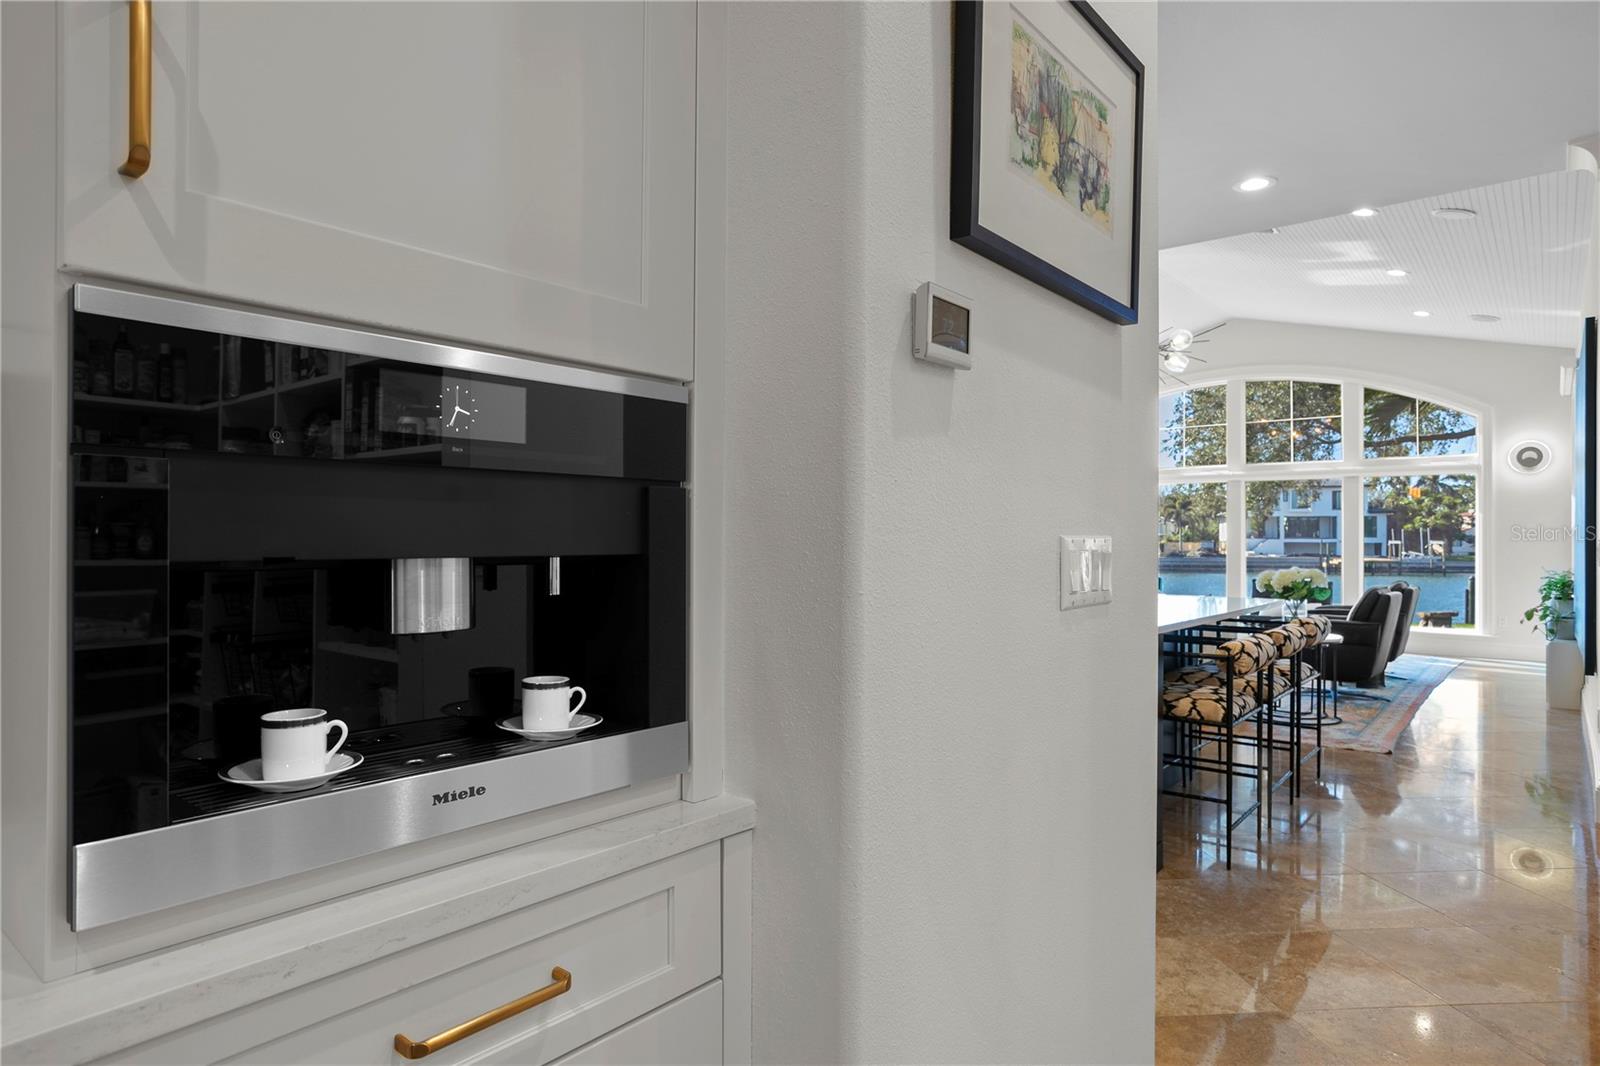 The butler pantry has a dry bar, Miele coffee maker and access to the oversized walk-in updatred pantry.